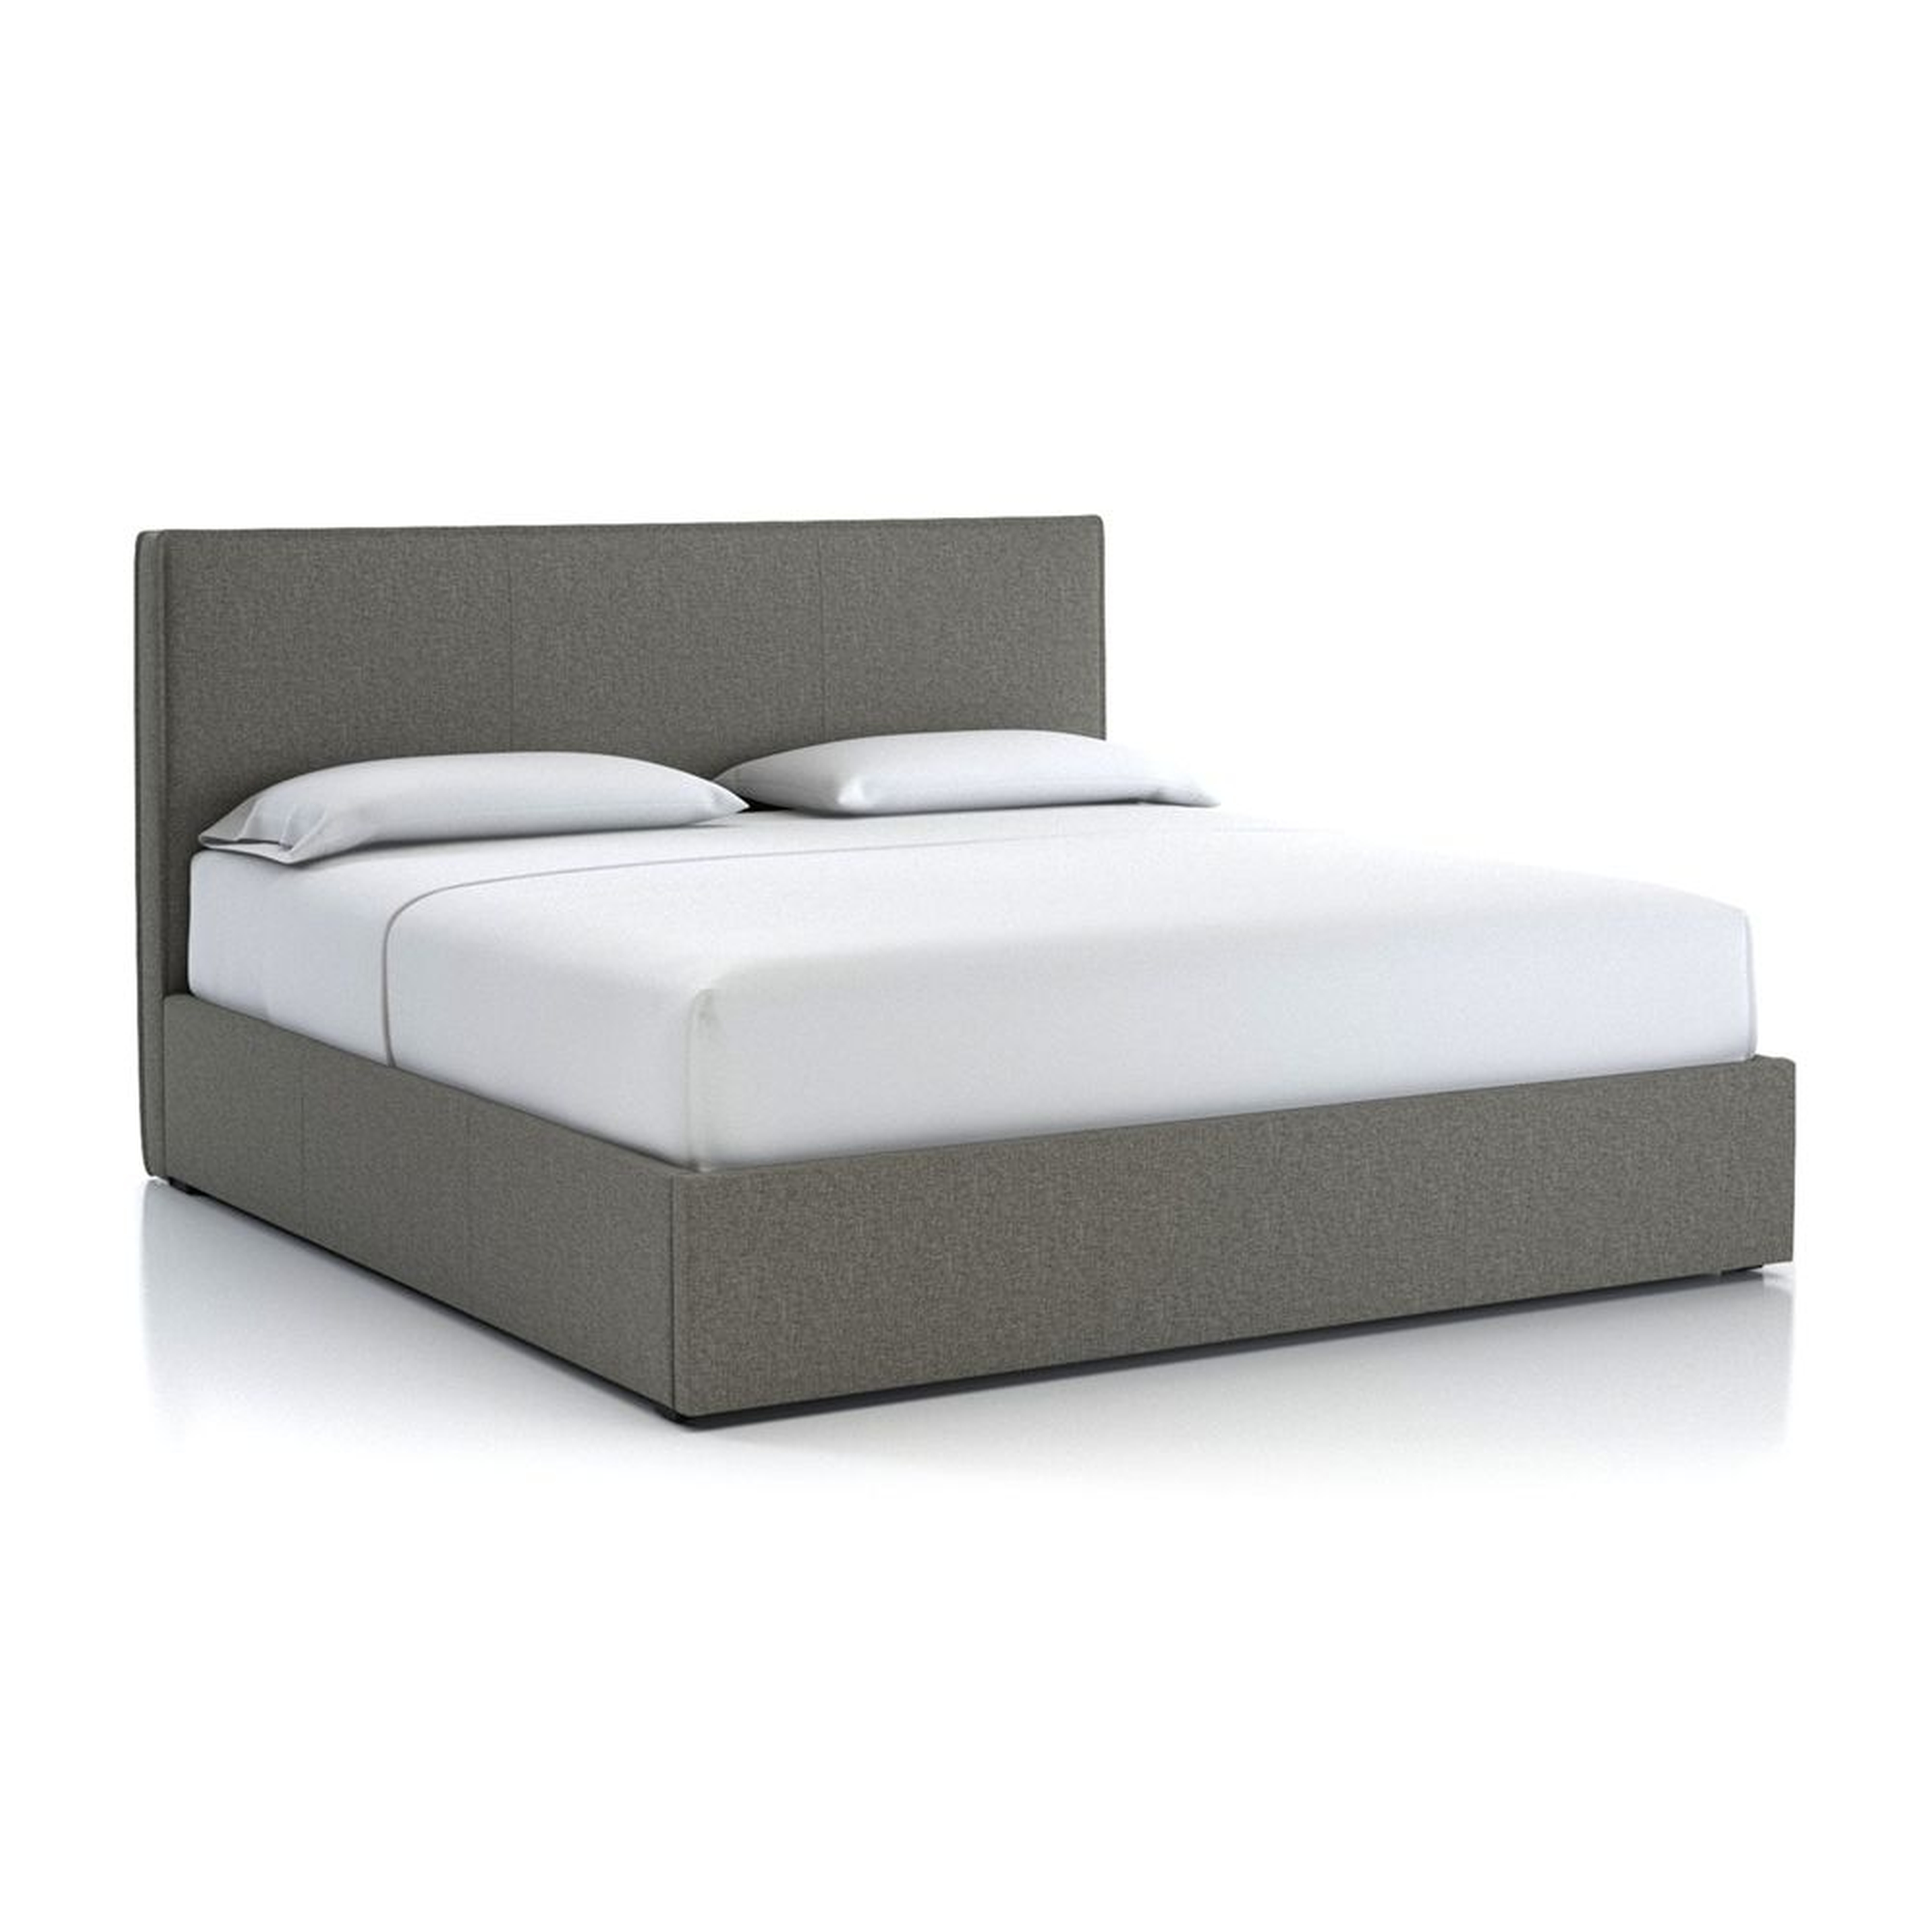 Flange King Bed Grey - Crate and Barrel